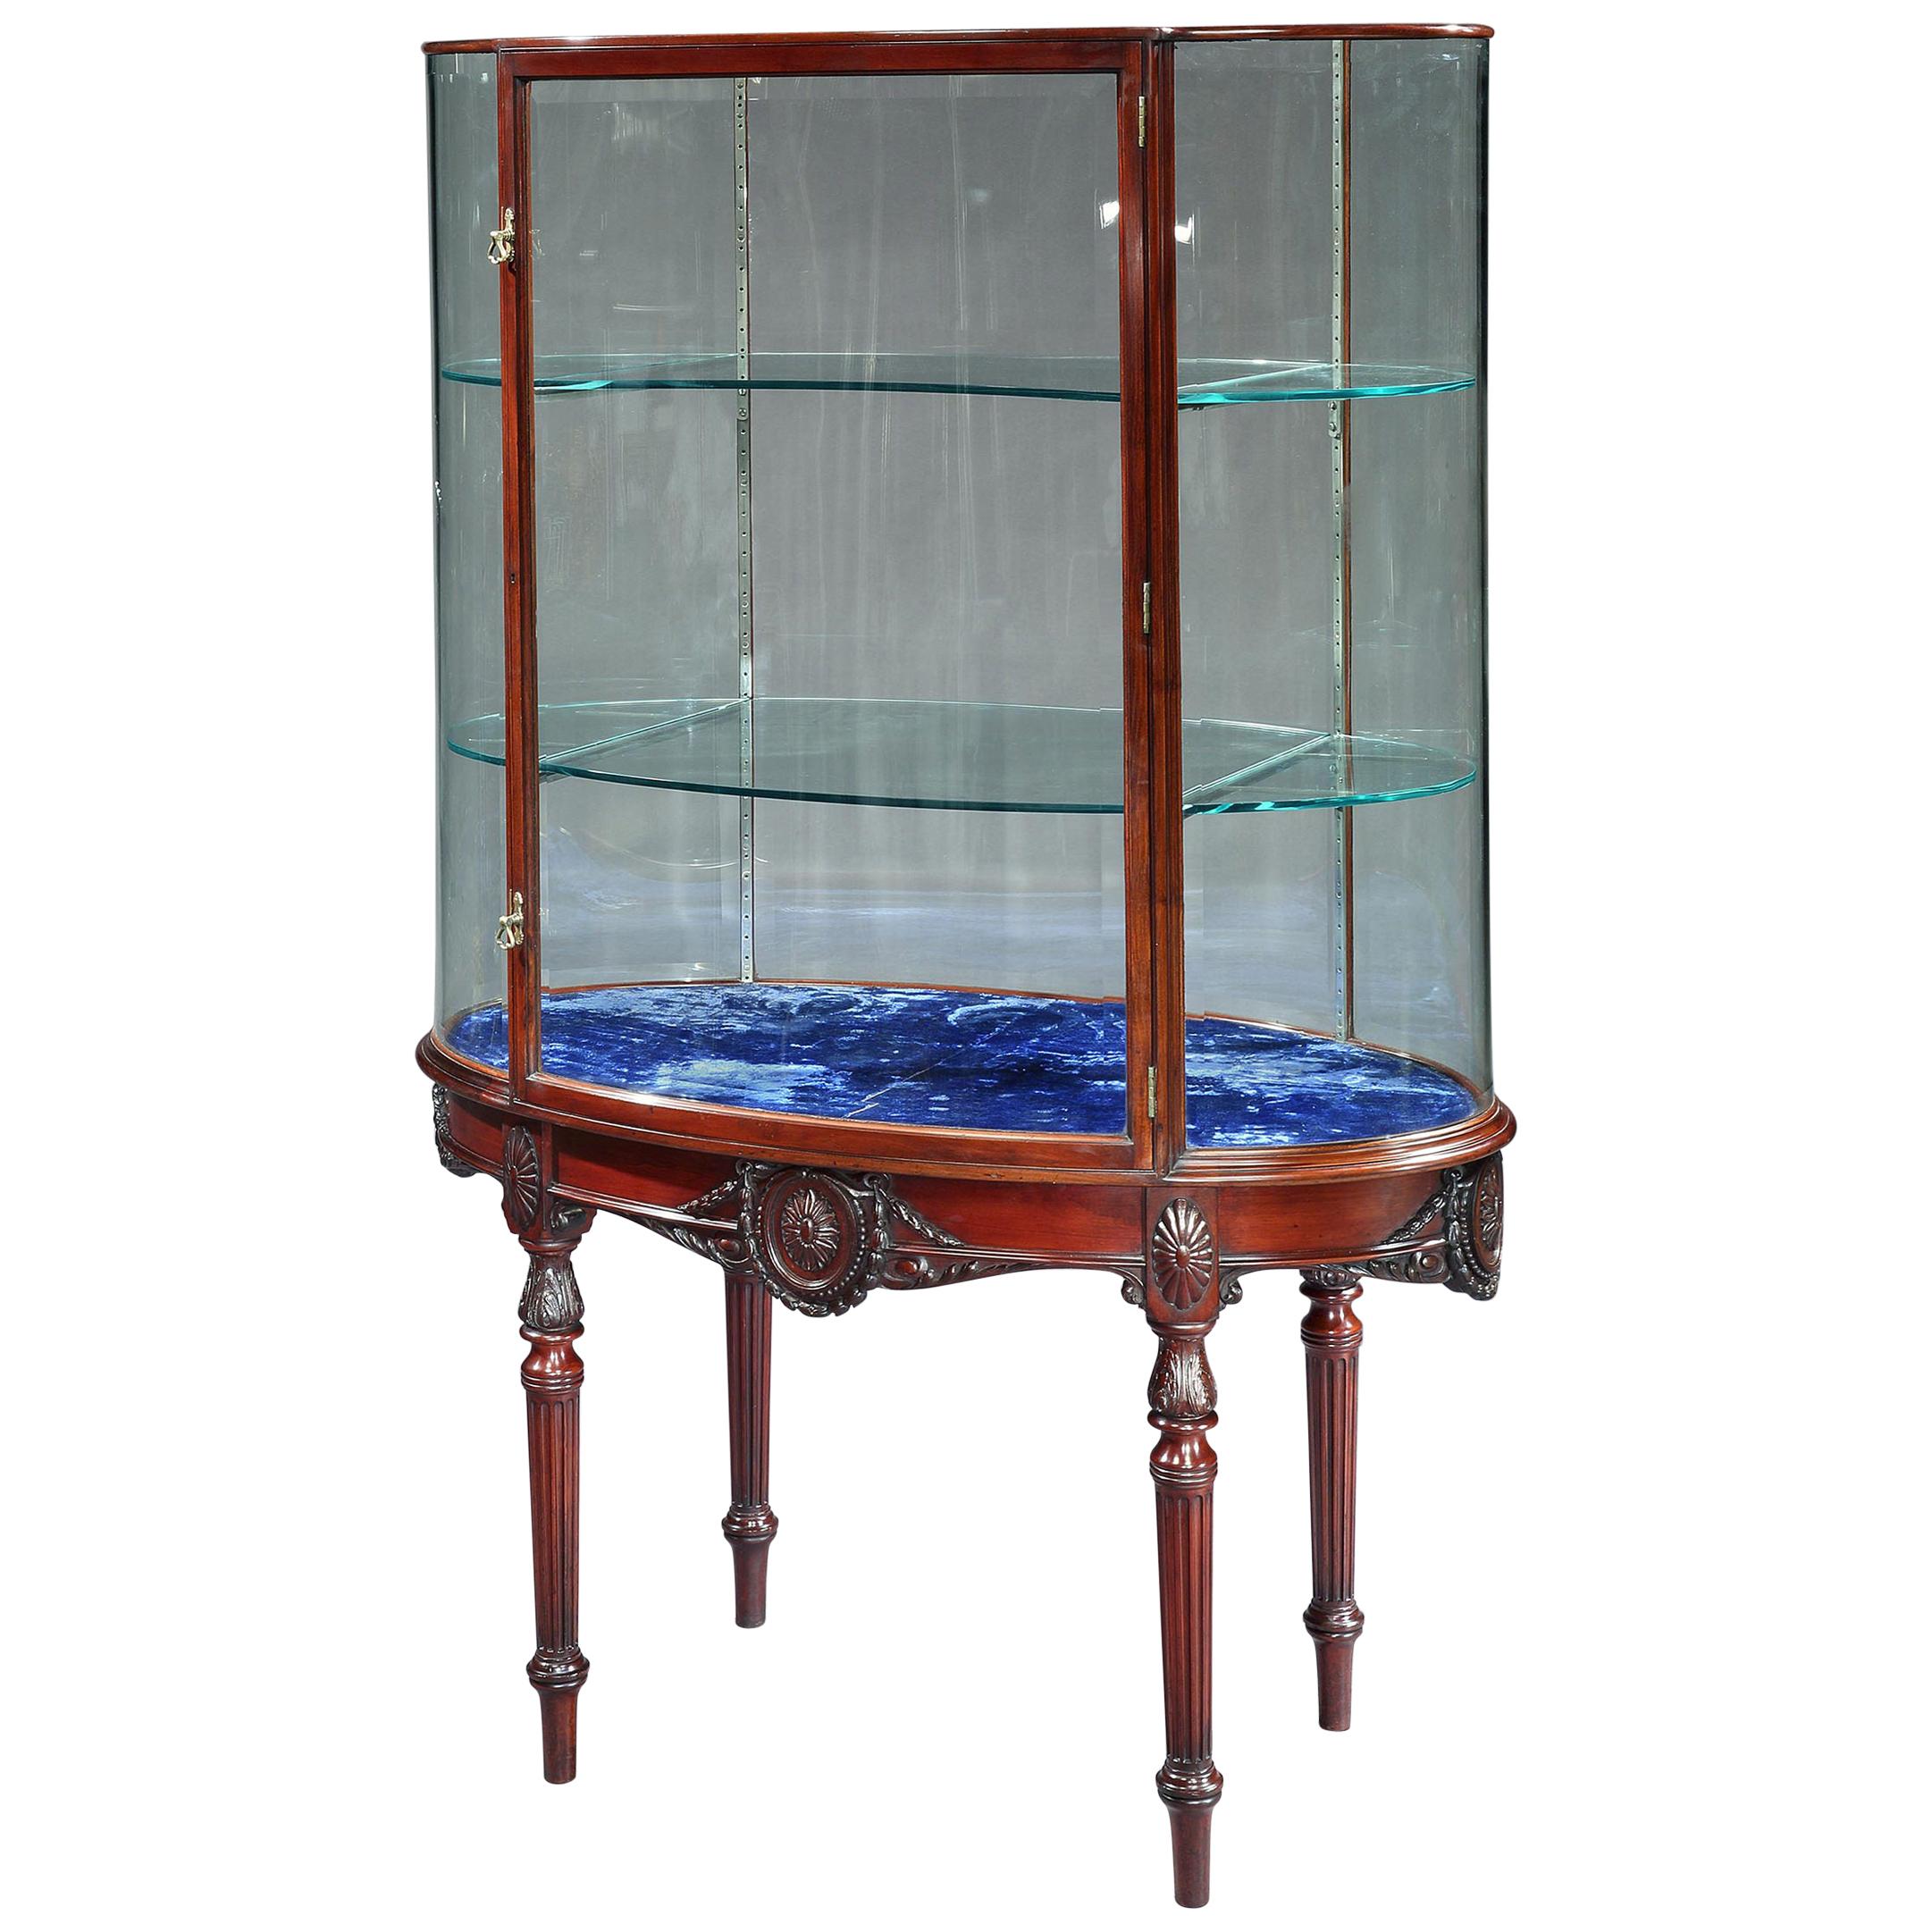 Rare Edwardian Oval Mahogany Display Cabinet in the Adam Manner by F. Sage & Co